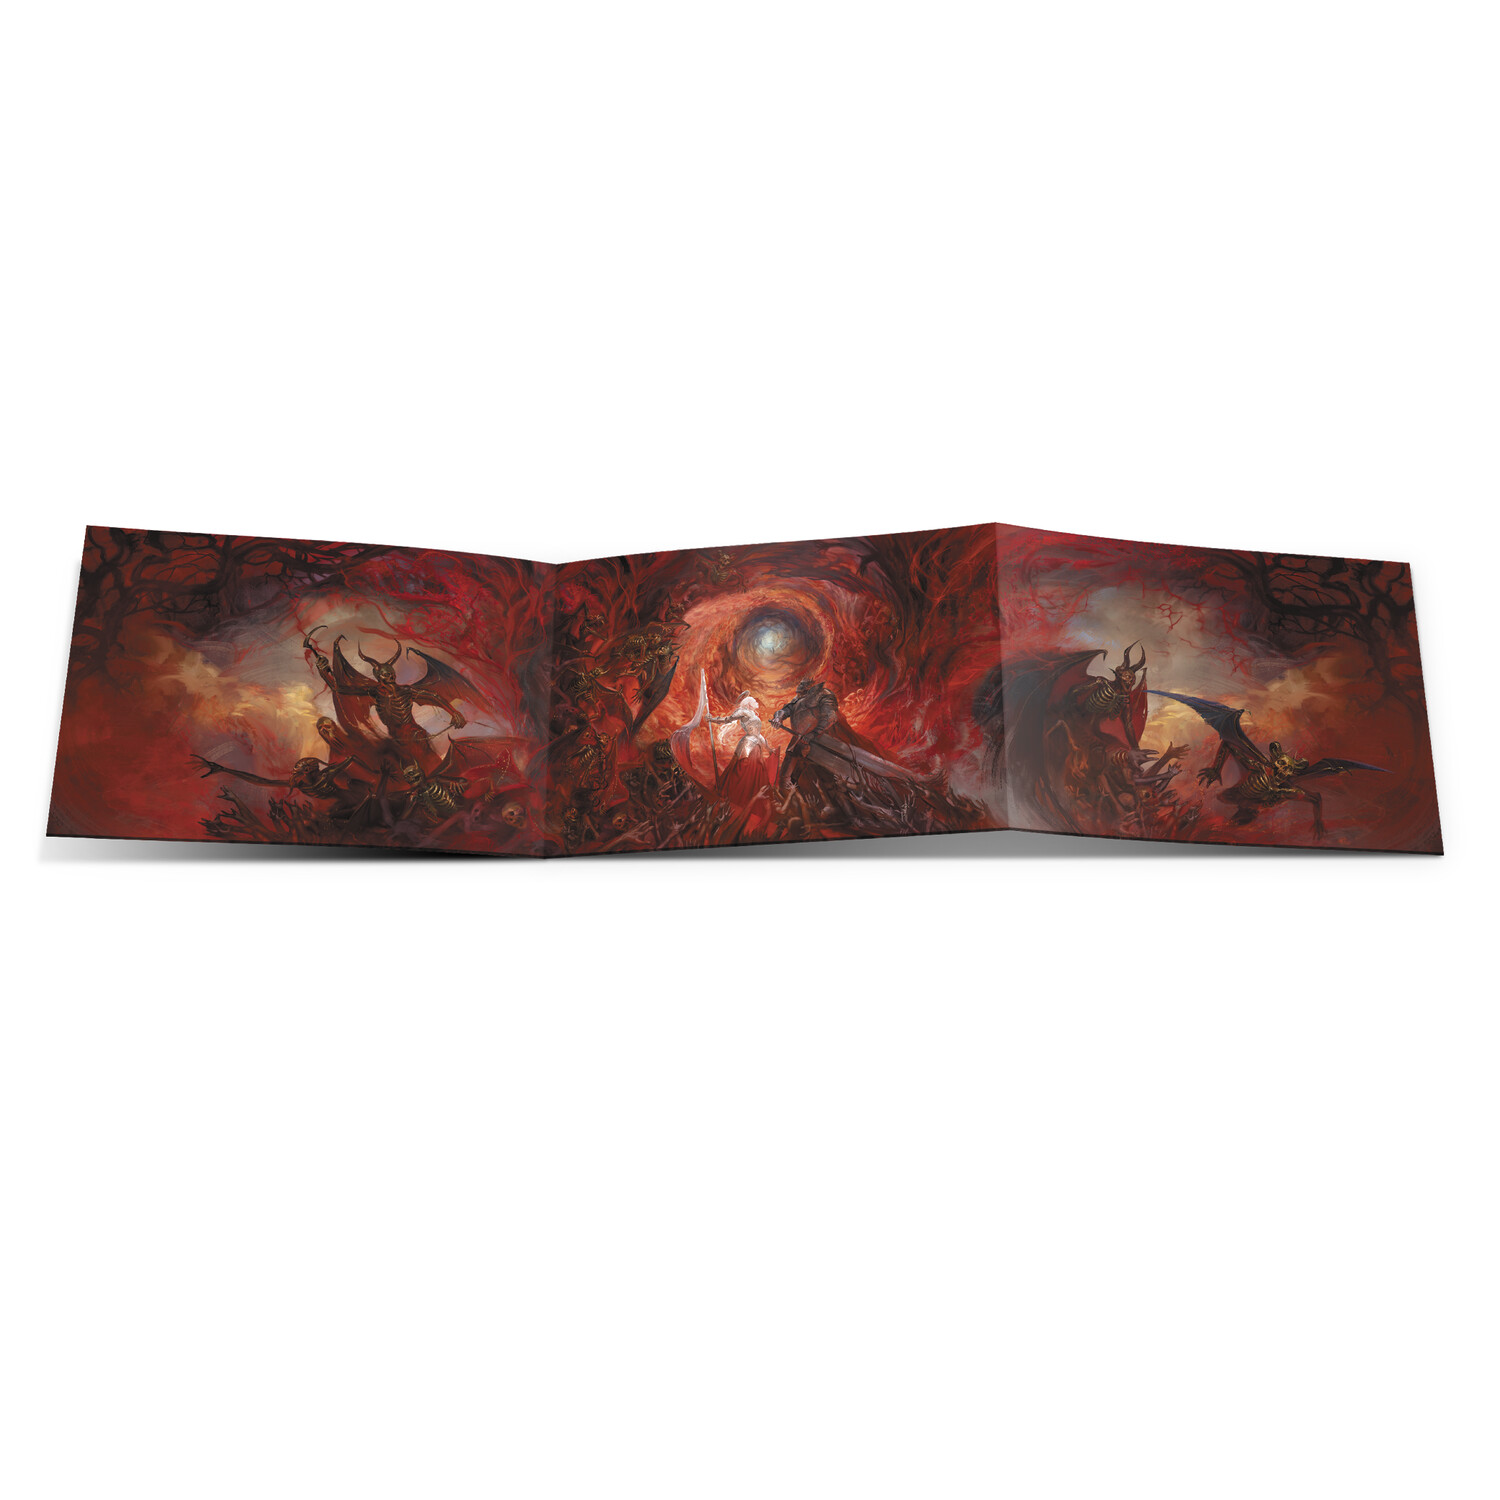 Inferno - Dante's Guide to Hell for 5e by Acheron Games - Lussurioso -  Gamefound